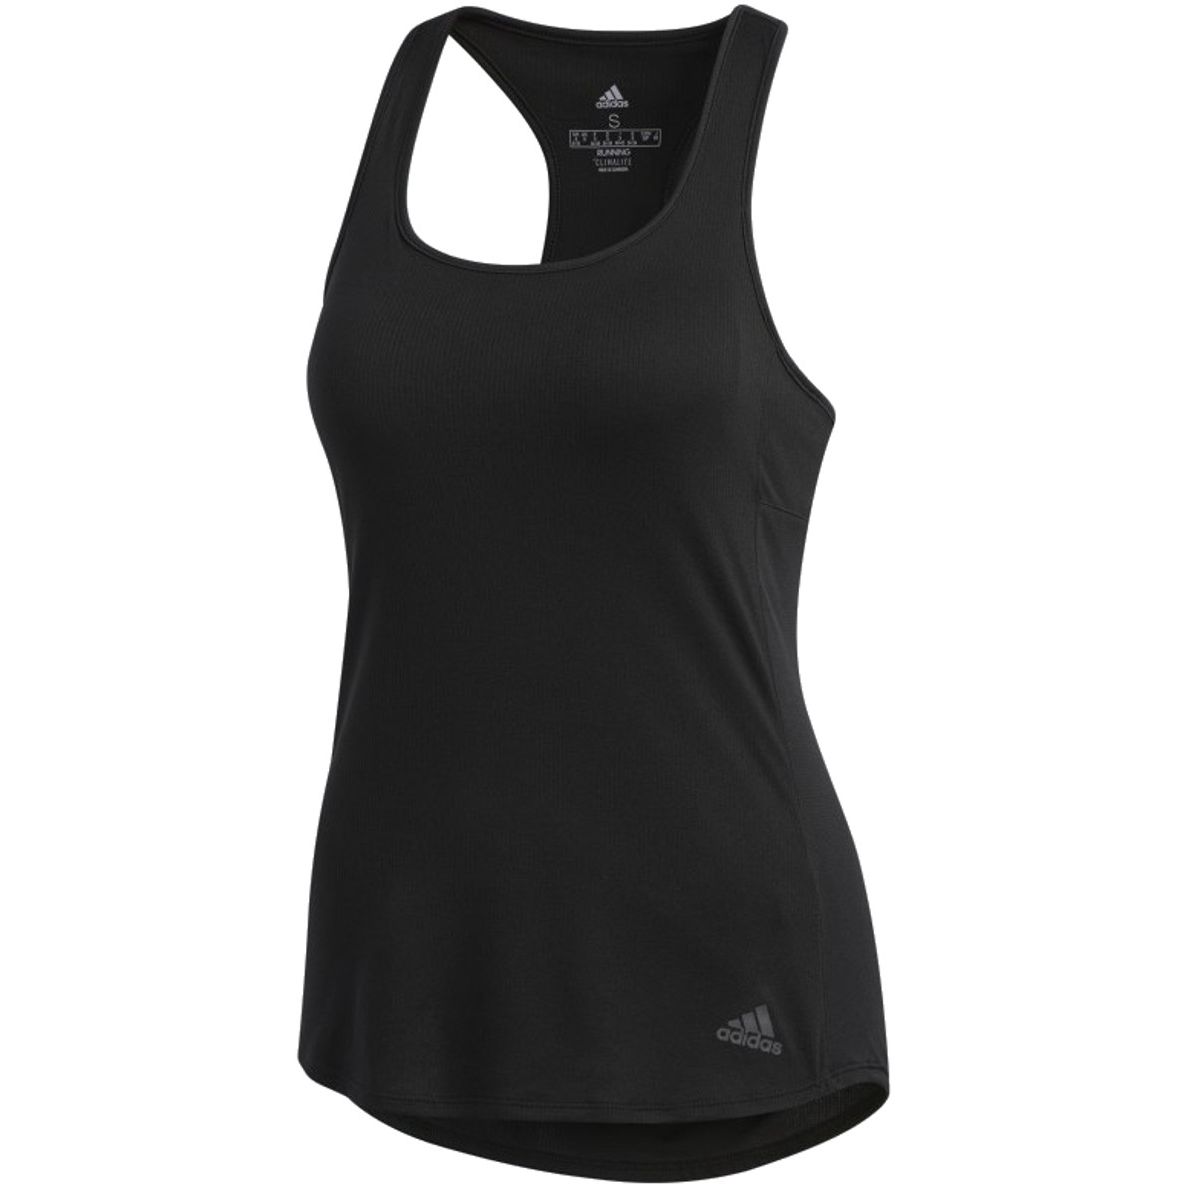 Babolat Childrens Compete Tank Top Girl Tight 